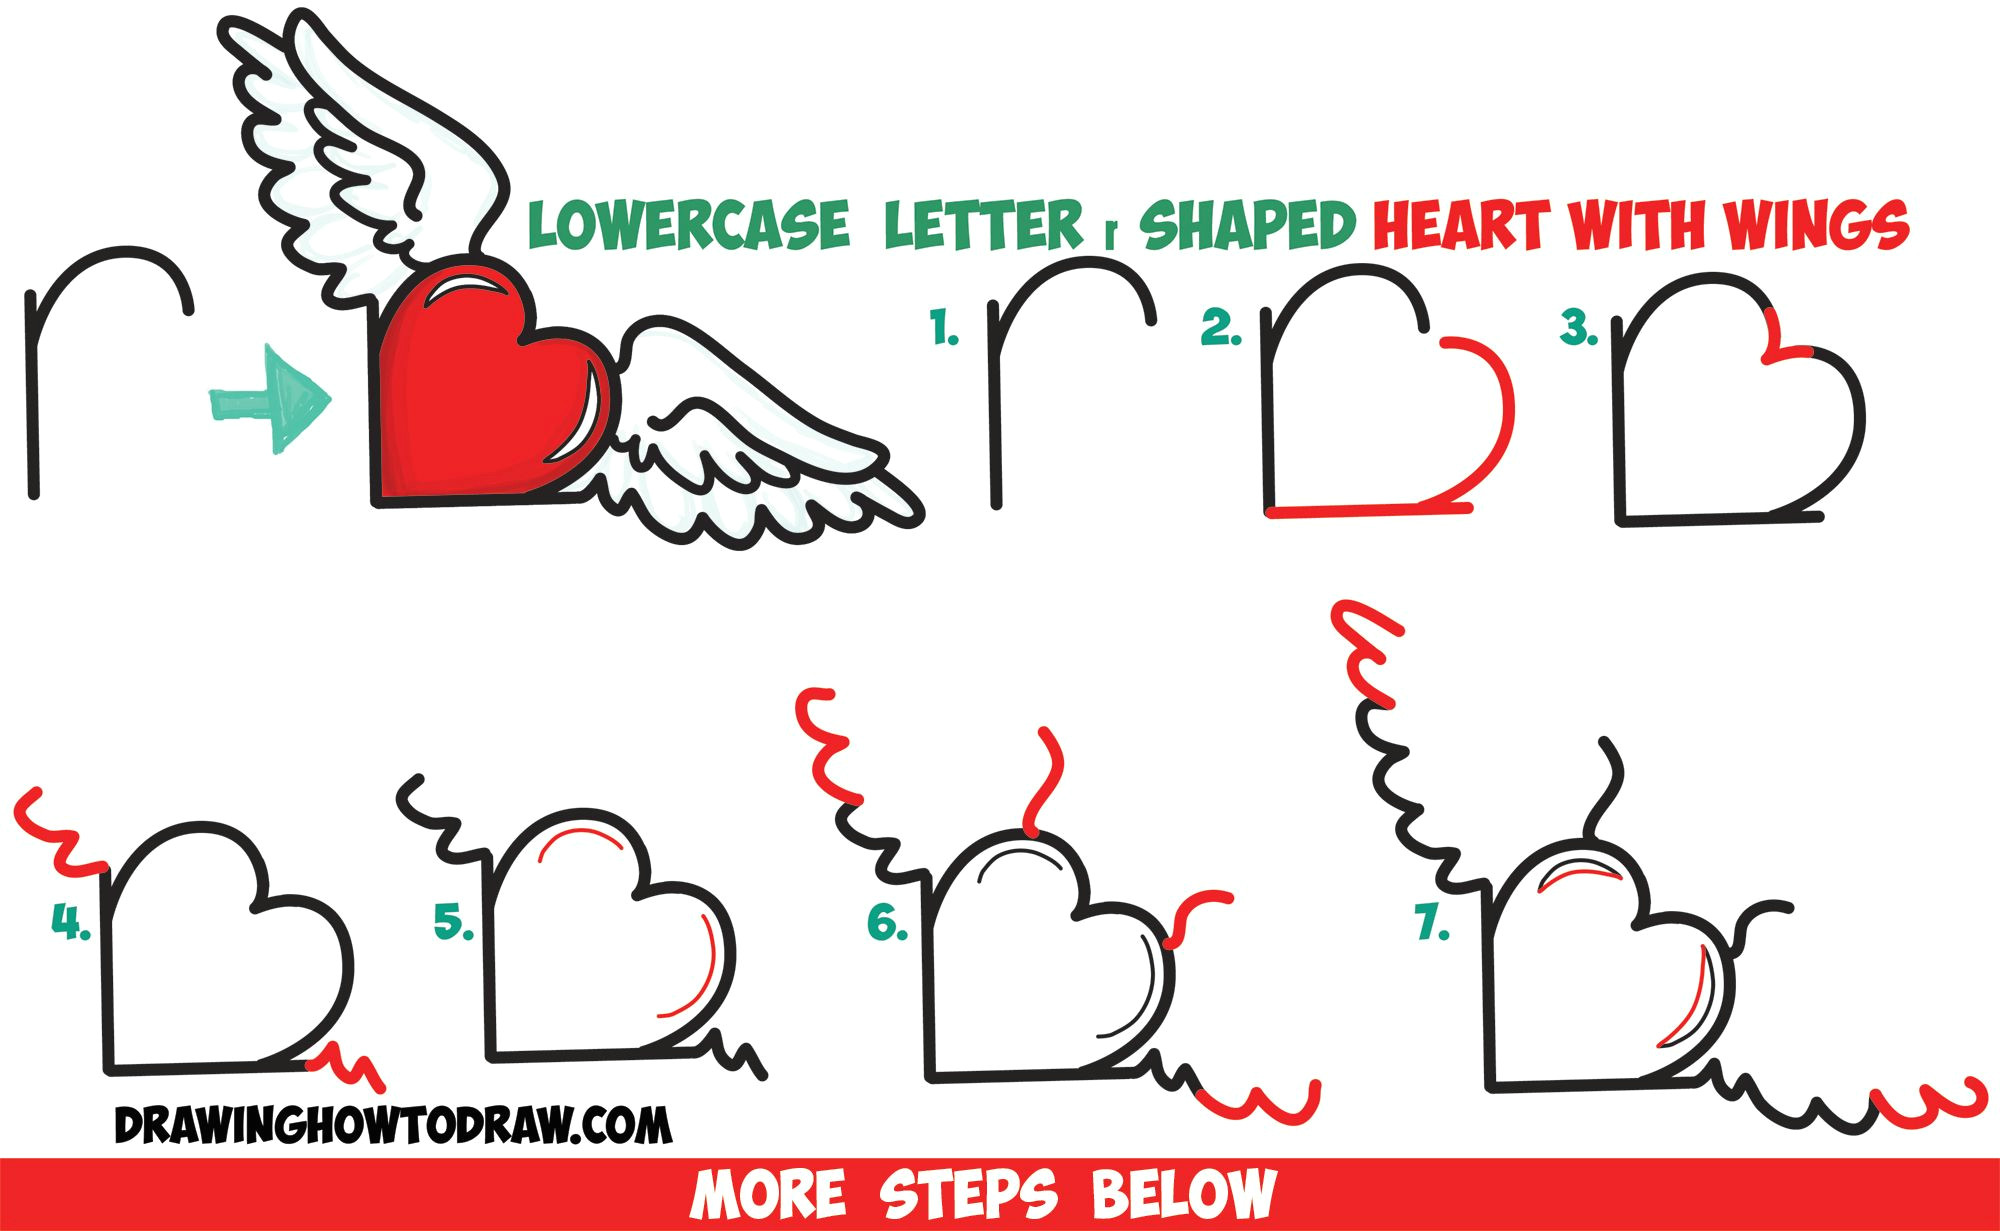 Drawing A Heart with Text How to Draw Heart with Wings From Lowercase Letter R Shapes Easy